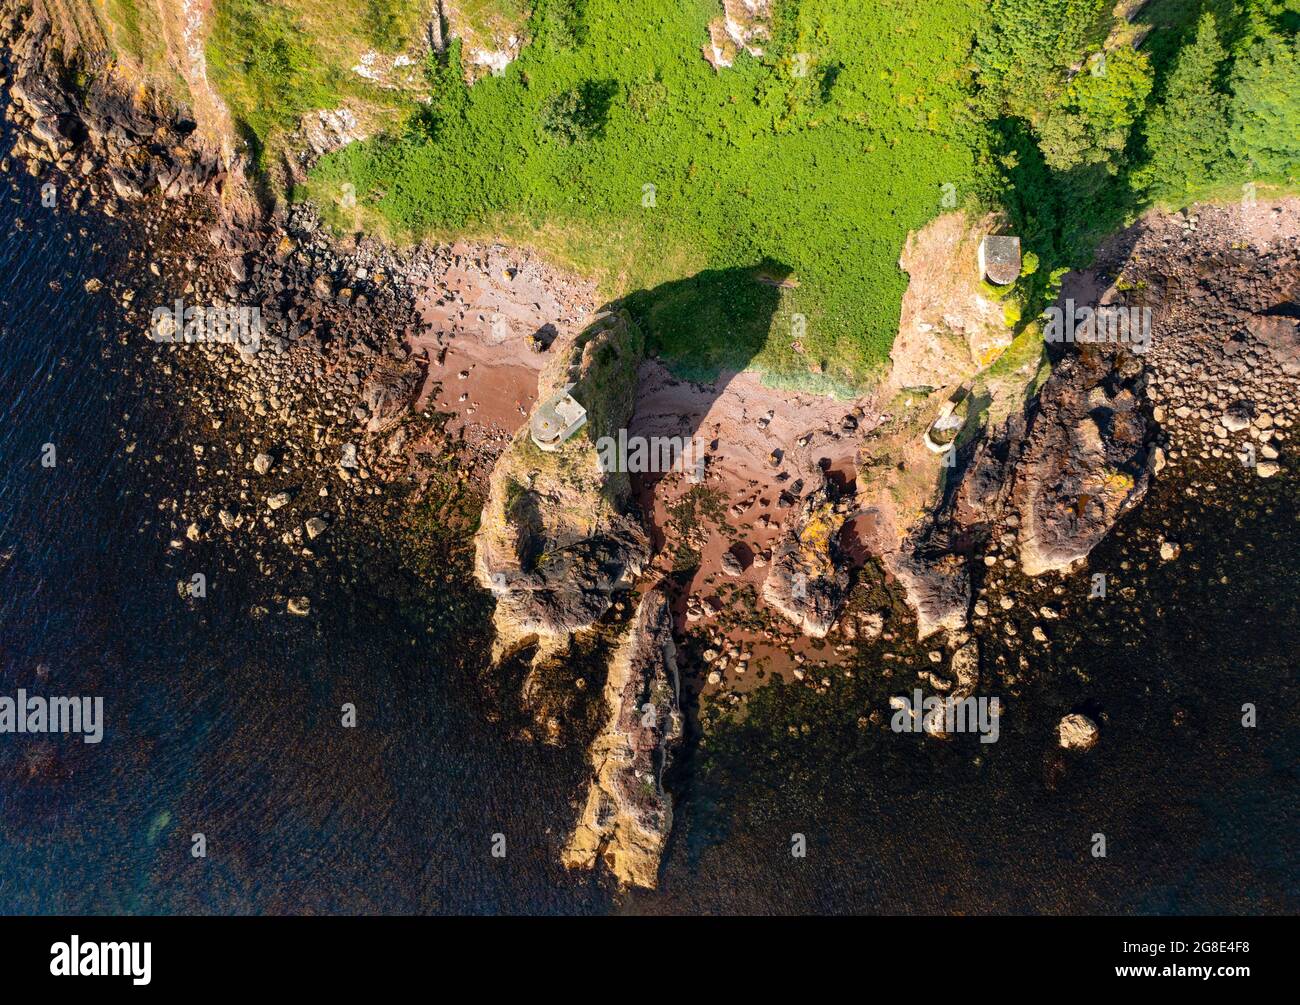 Aerial view of WWII coastal defences batteries at South Sutor of Cromarty headland at entrance to Cromarty firth in Ross and Cromarty, Scotland Stock Photo